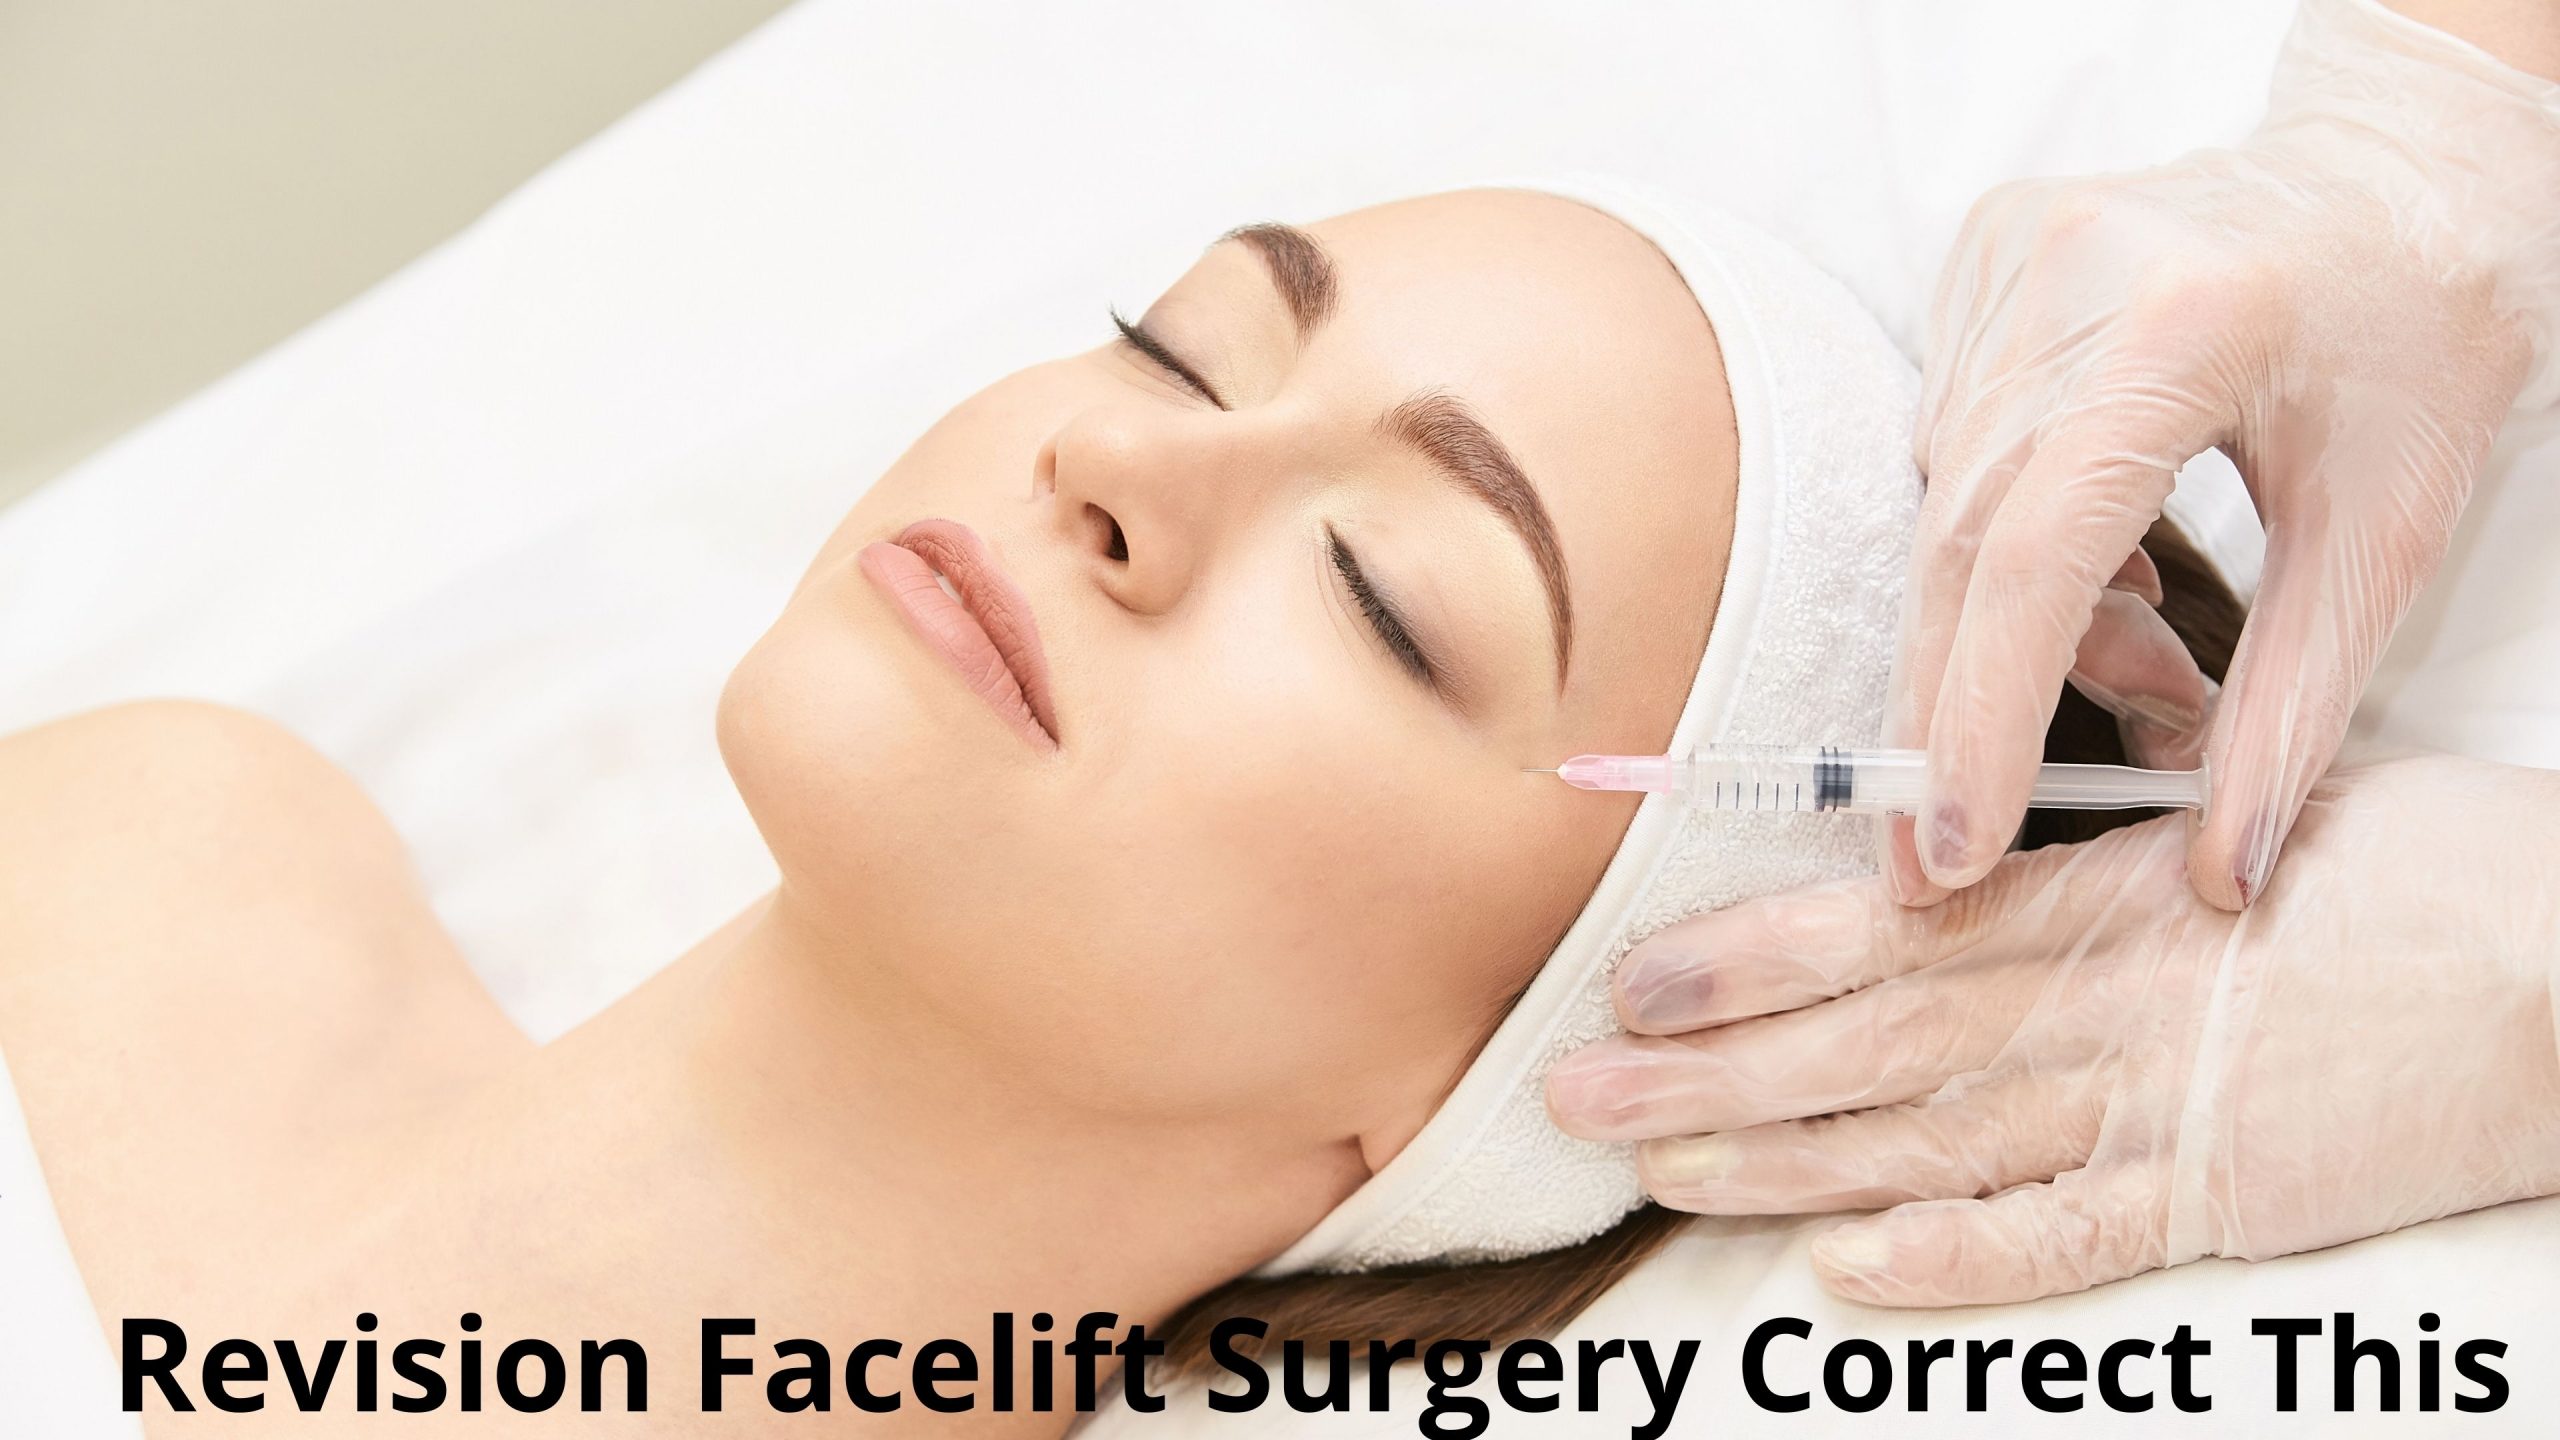 Can a Revision Facelift Surgery Correct This?